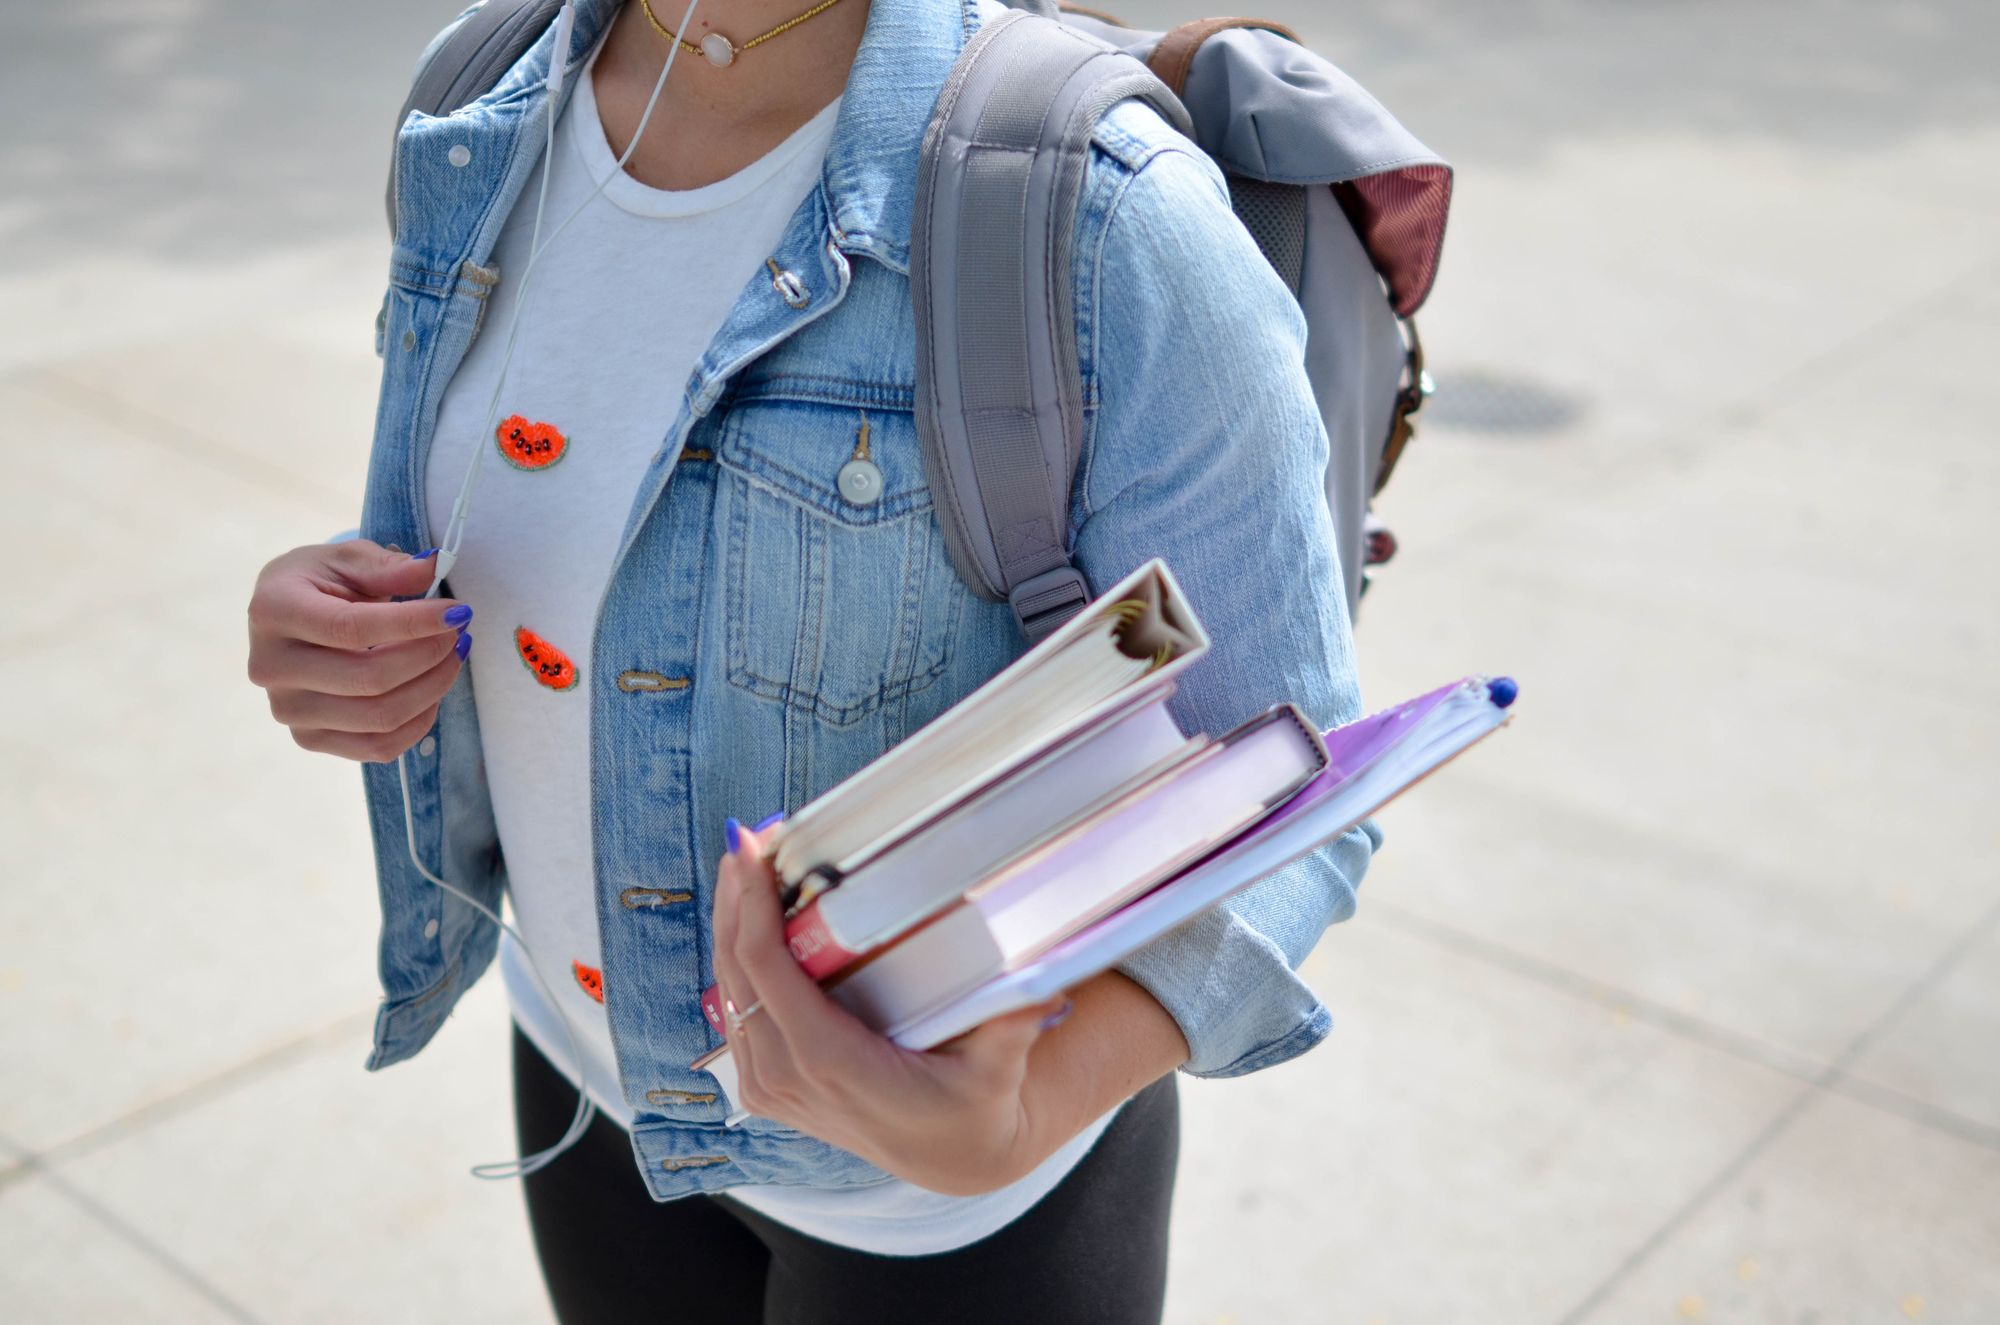 Get Ready for College with Rewards: Essential Back-to-School Checklist